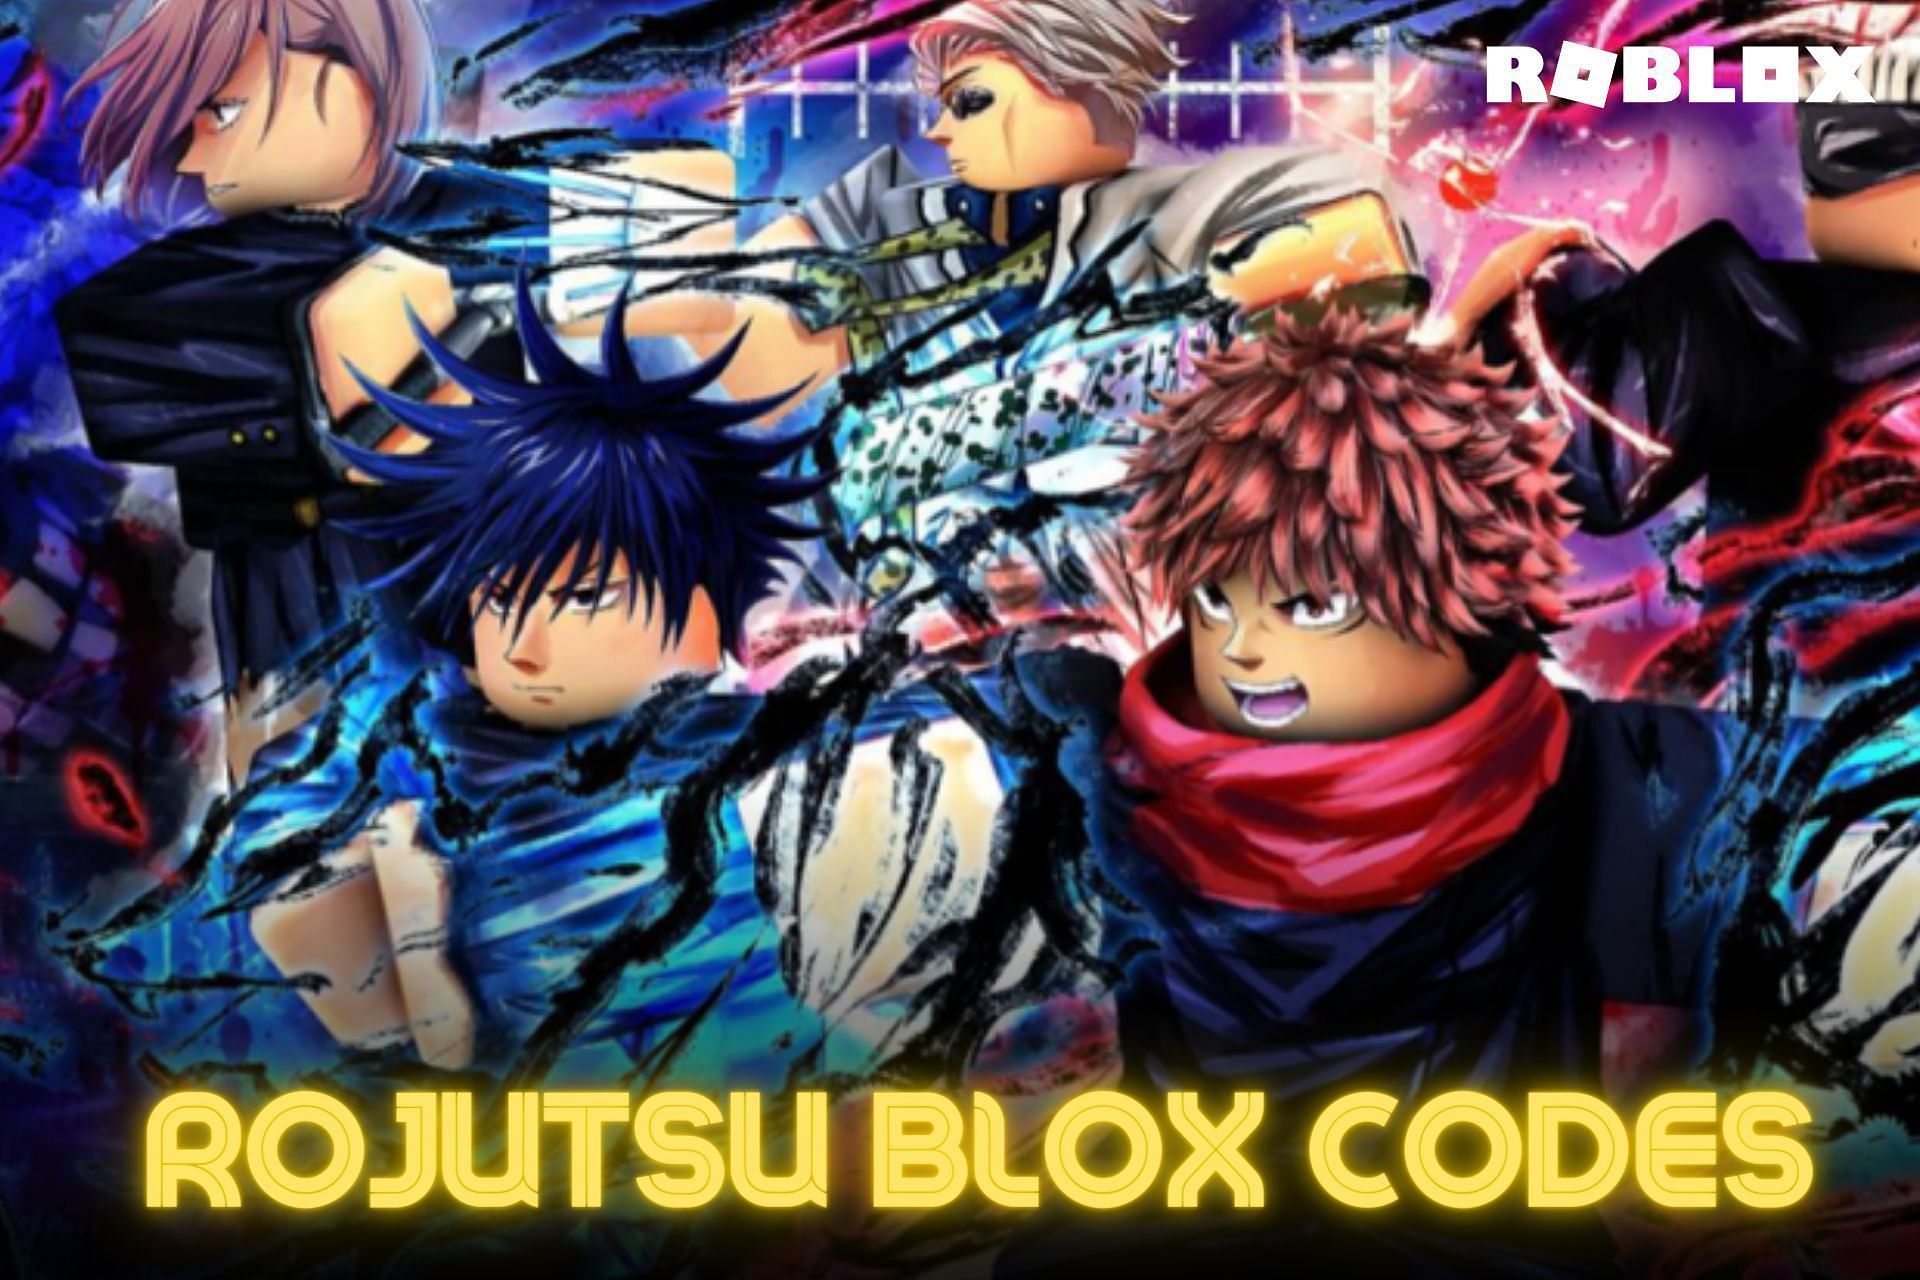 Roblox' Anime Story Redeem Codes for January 2023: How to Get XP